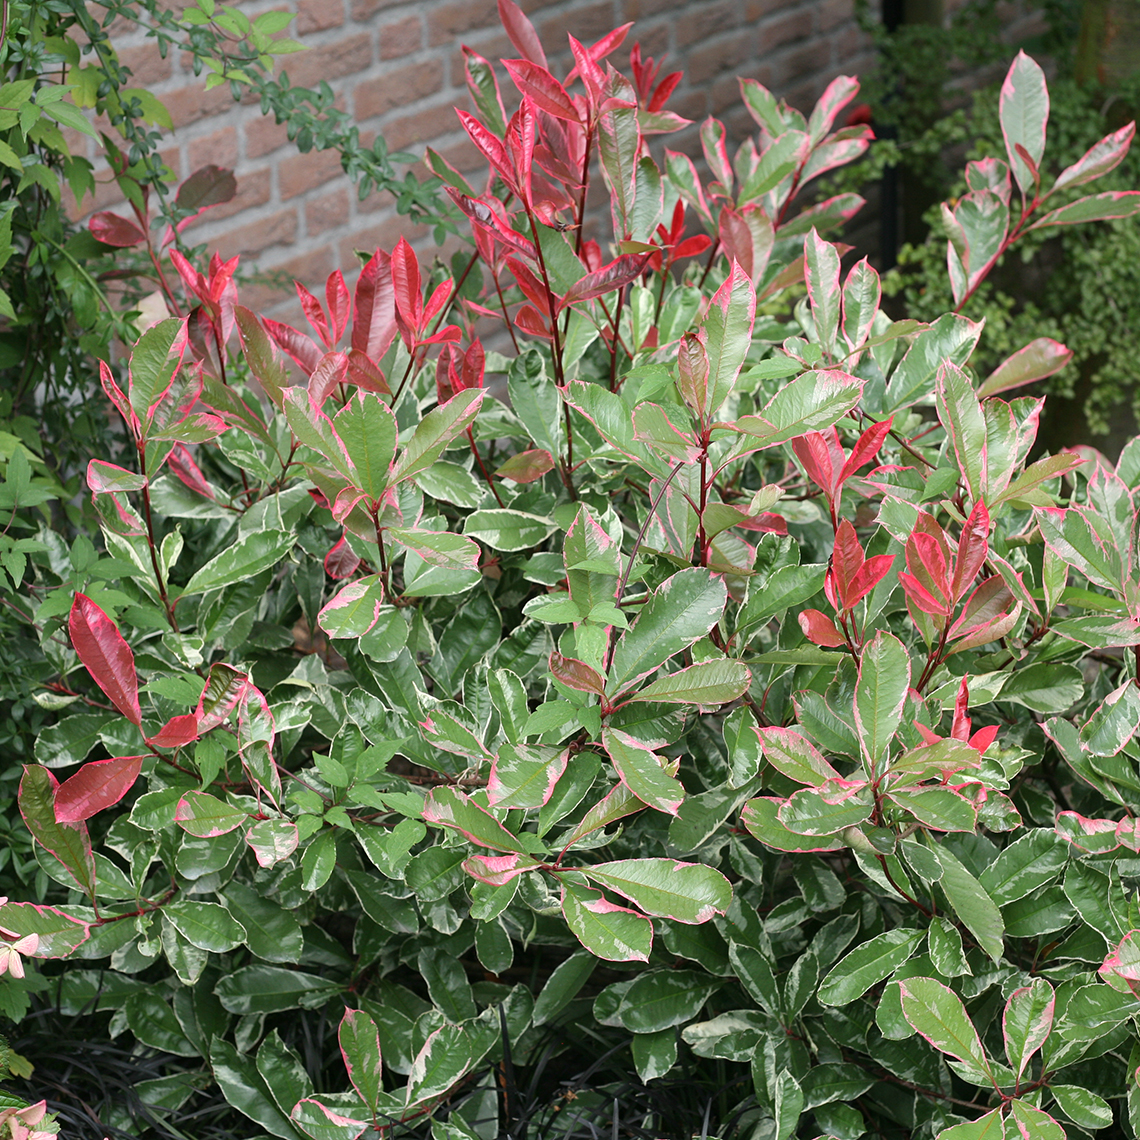 Pink Marble Photinia with red new growth on foliage